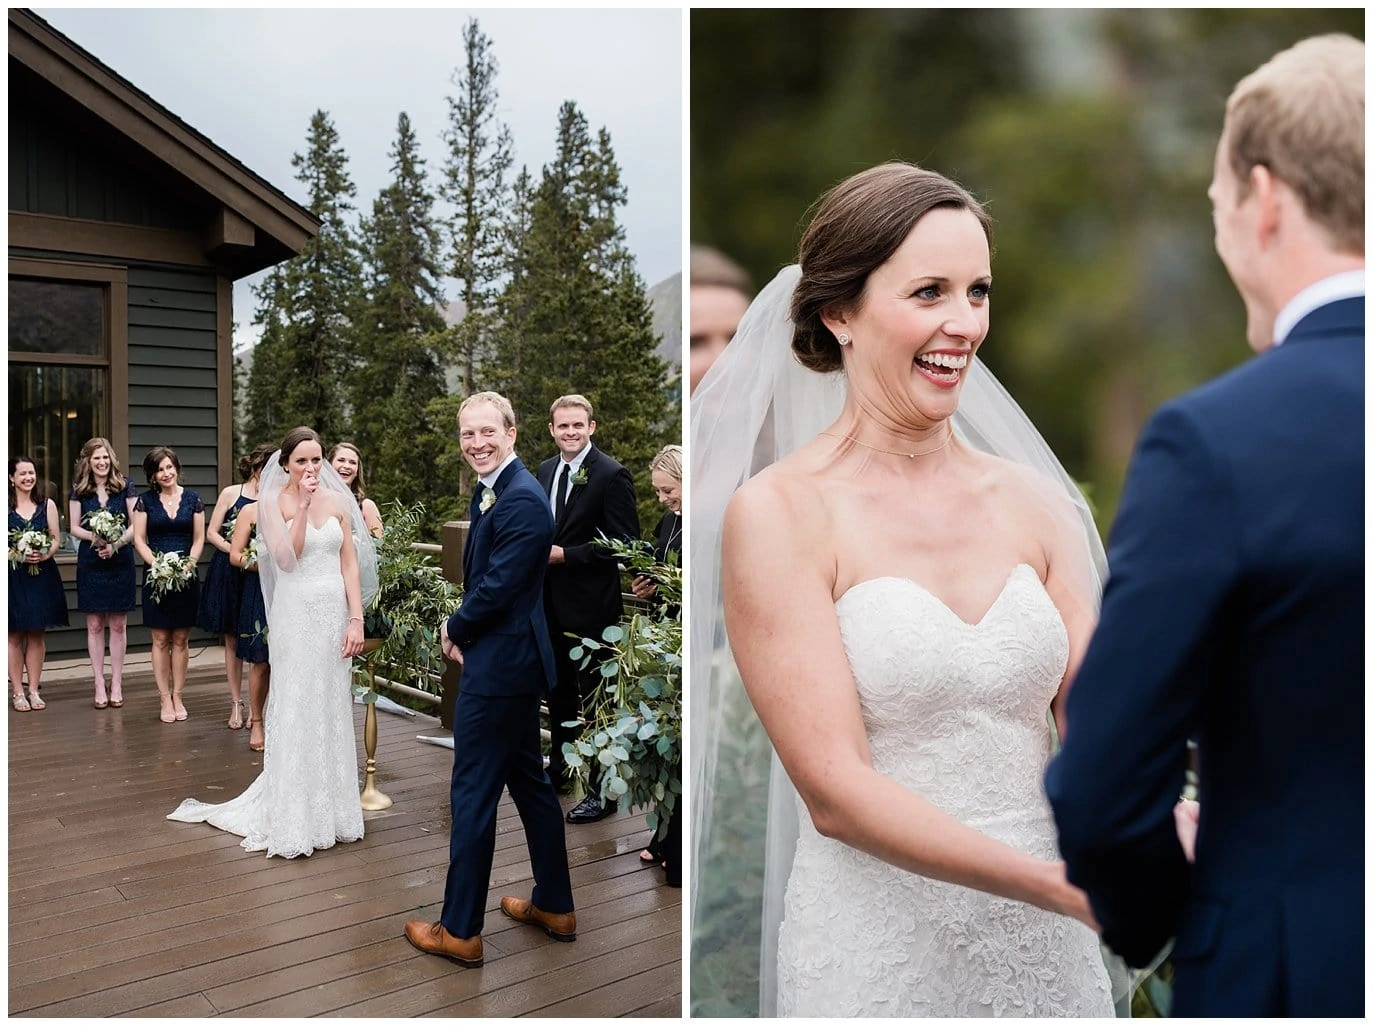 beautiful ceremony in the rain at Arapahoe Basin Black Mountain Lodge Wedding by Silverthorne Wedding Photographer Jennie Crate